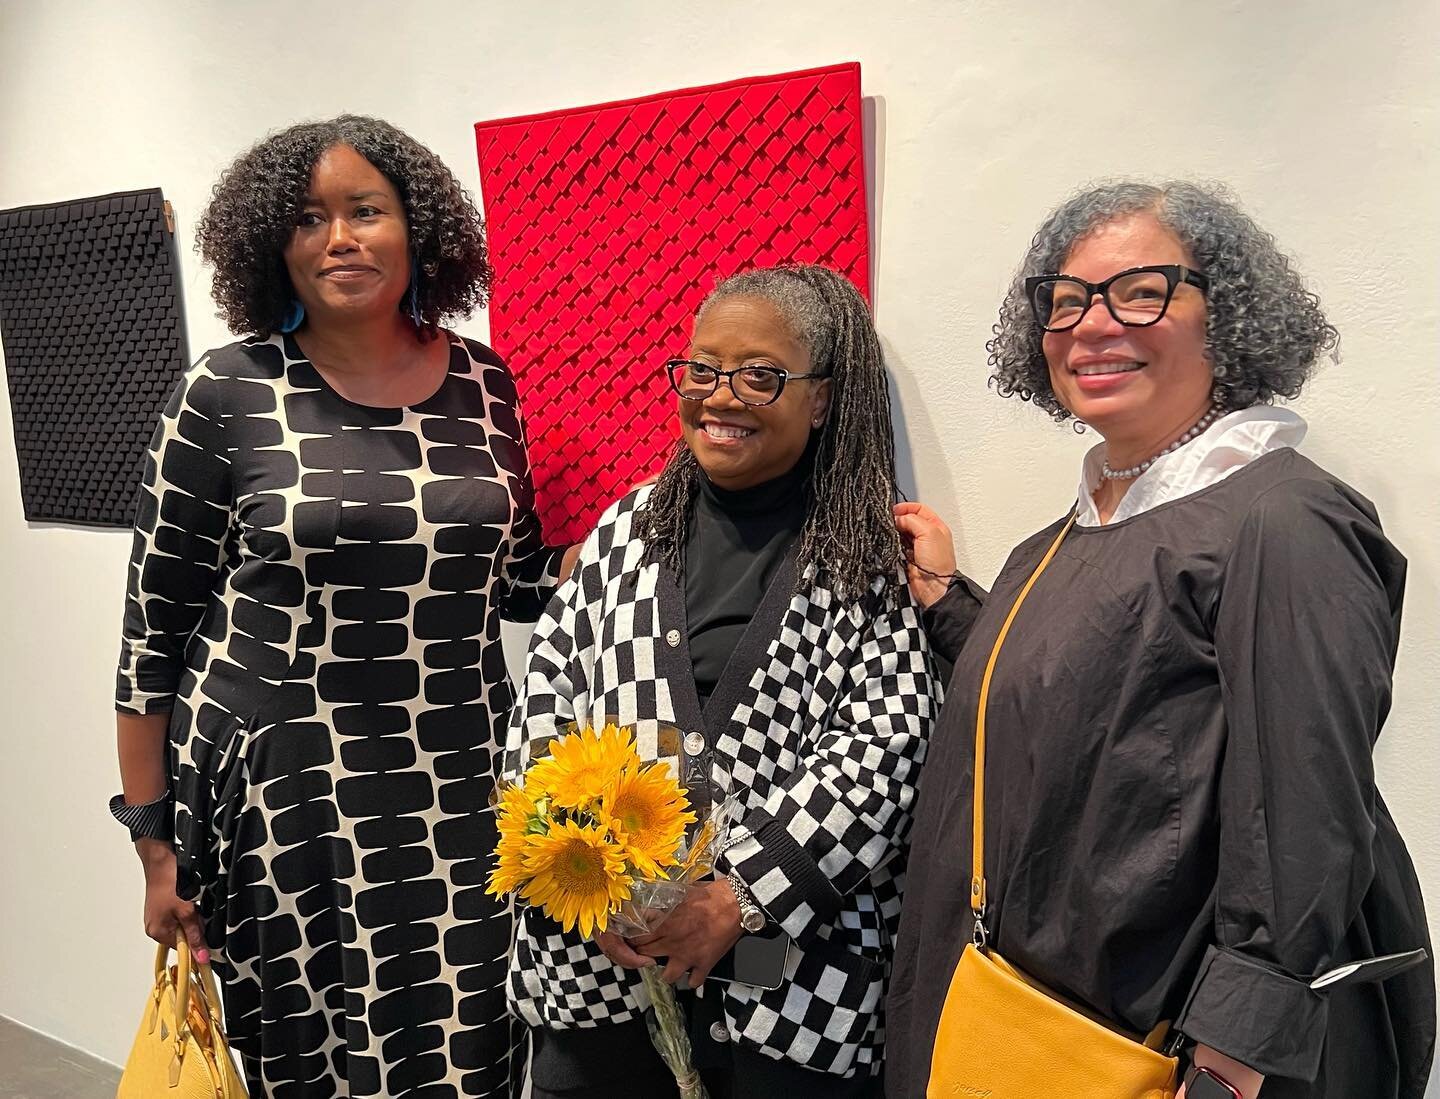 Congrats to Lavialle Campbell and Robin Mitchell on their marvelous exhibitions.
@artlovely @robinmitchellart @bcooks2001 @pamsmithhudson @lavathomas @christophermford @cliff_benjamin_art 
#galleryopening #exhibitionopening